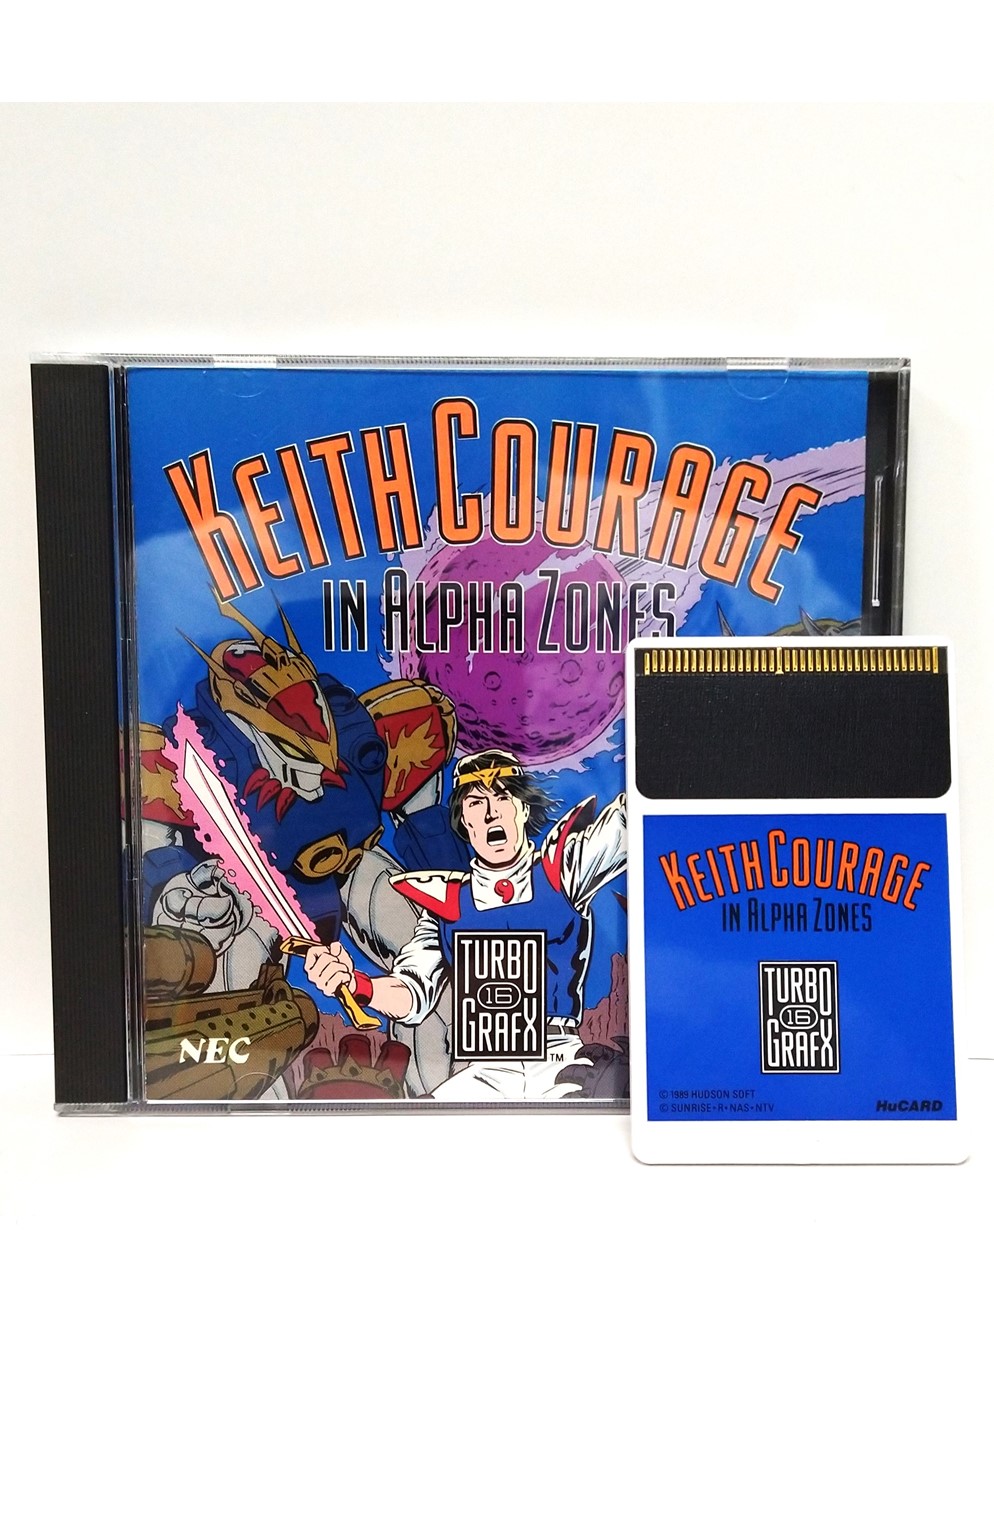 Turbografx 16 - Keith Courage In Alpha Zones (Very Good)